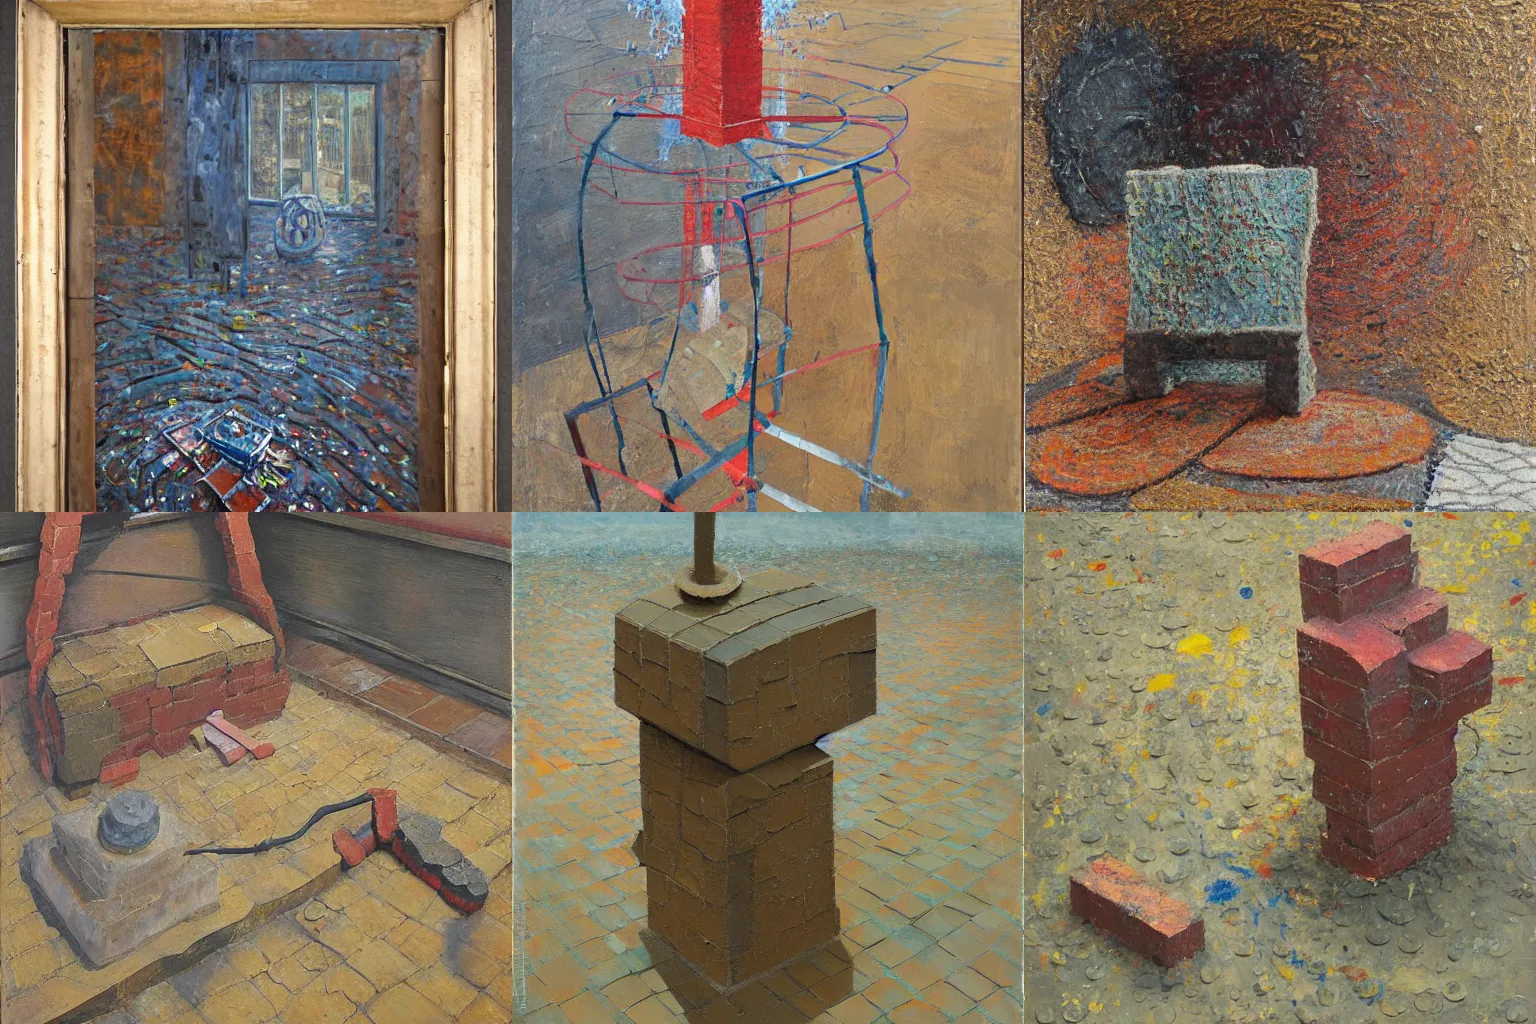 Prompt: a detailed, impasto painting by shaun tan and louise bourgeois of an abstract forgotten sculpture on the ground by ivan seal and the caretaker